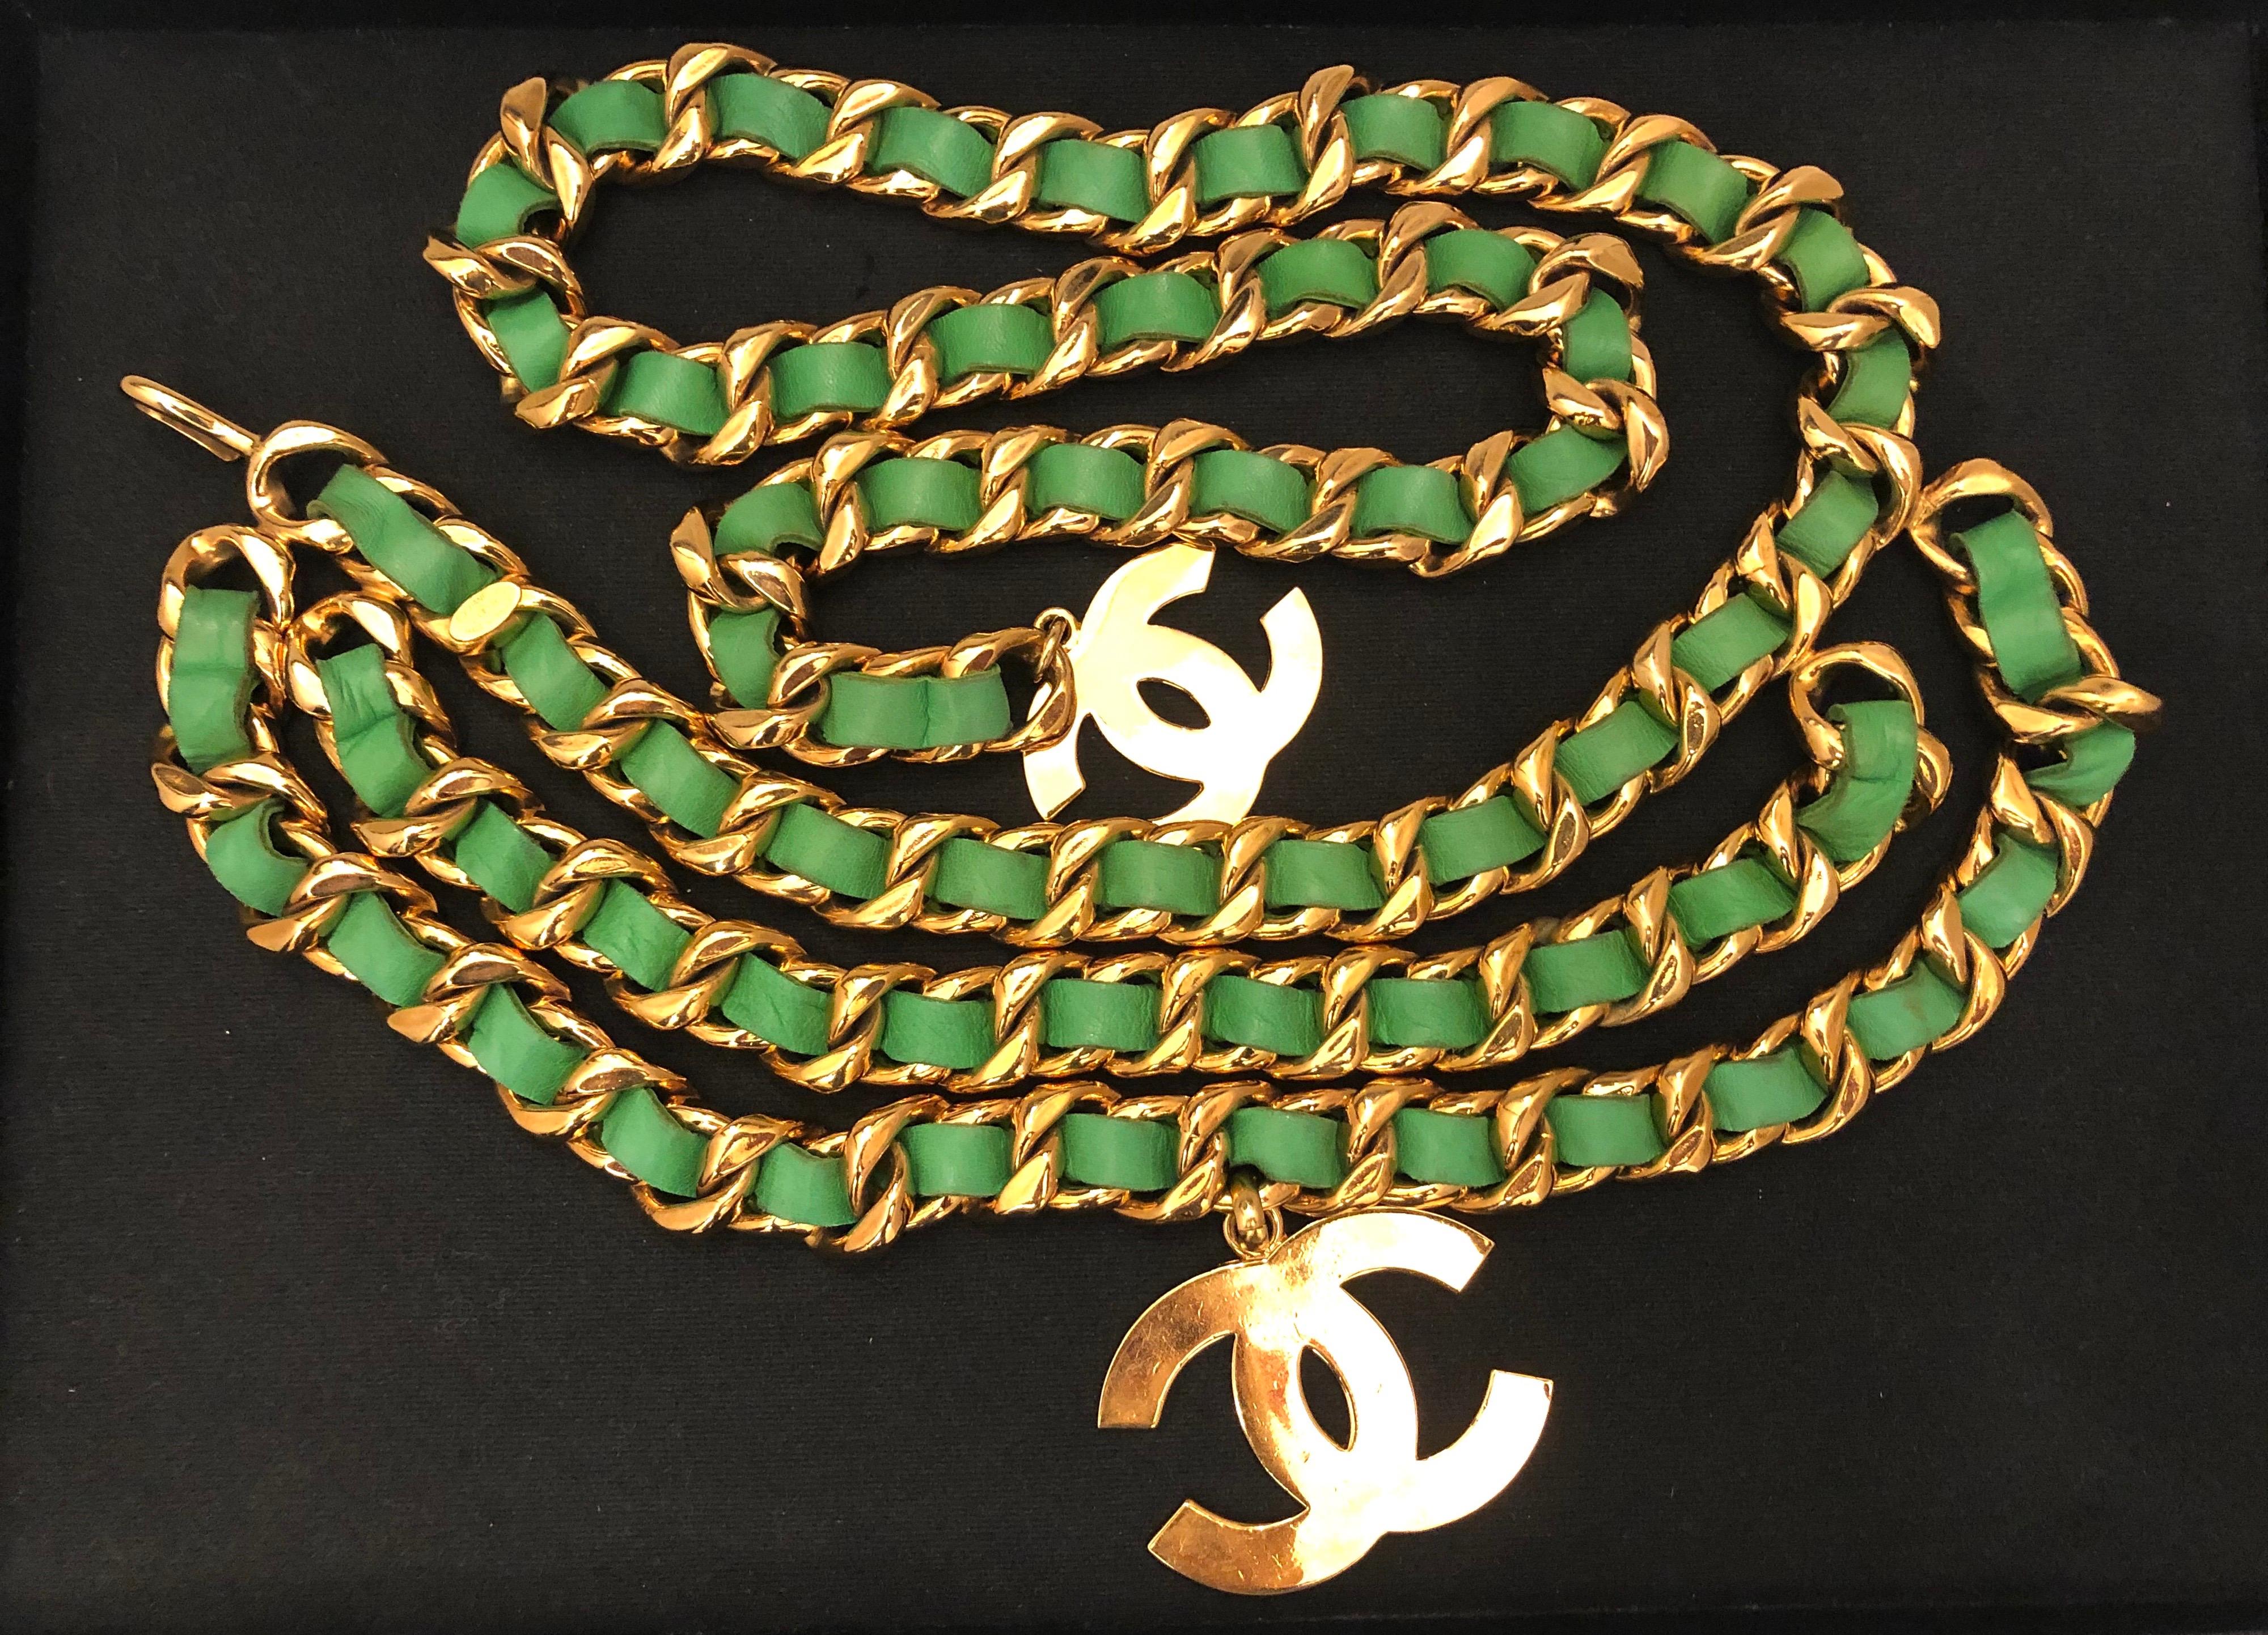 Early 1990s Chanel chunky chain belt has a triple chain front interlaced with green leather featuring two large CC charms. Total length of 10 cm (39.5 inches) Charms measure 4.2 x 6.3cm and 3.3 x 5cm. Adjustable hook fastening. It can be worn as a